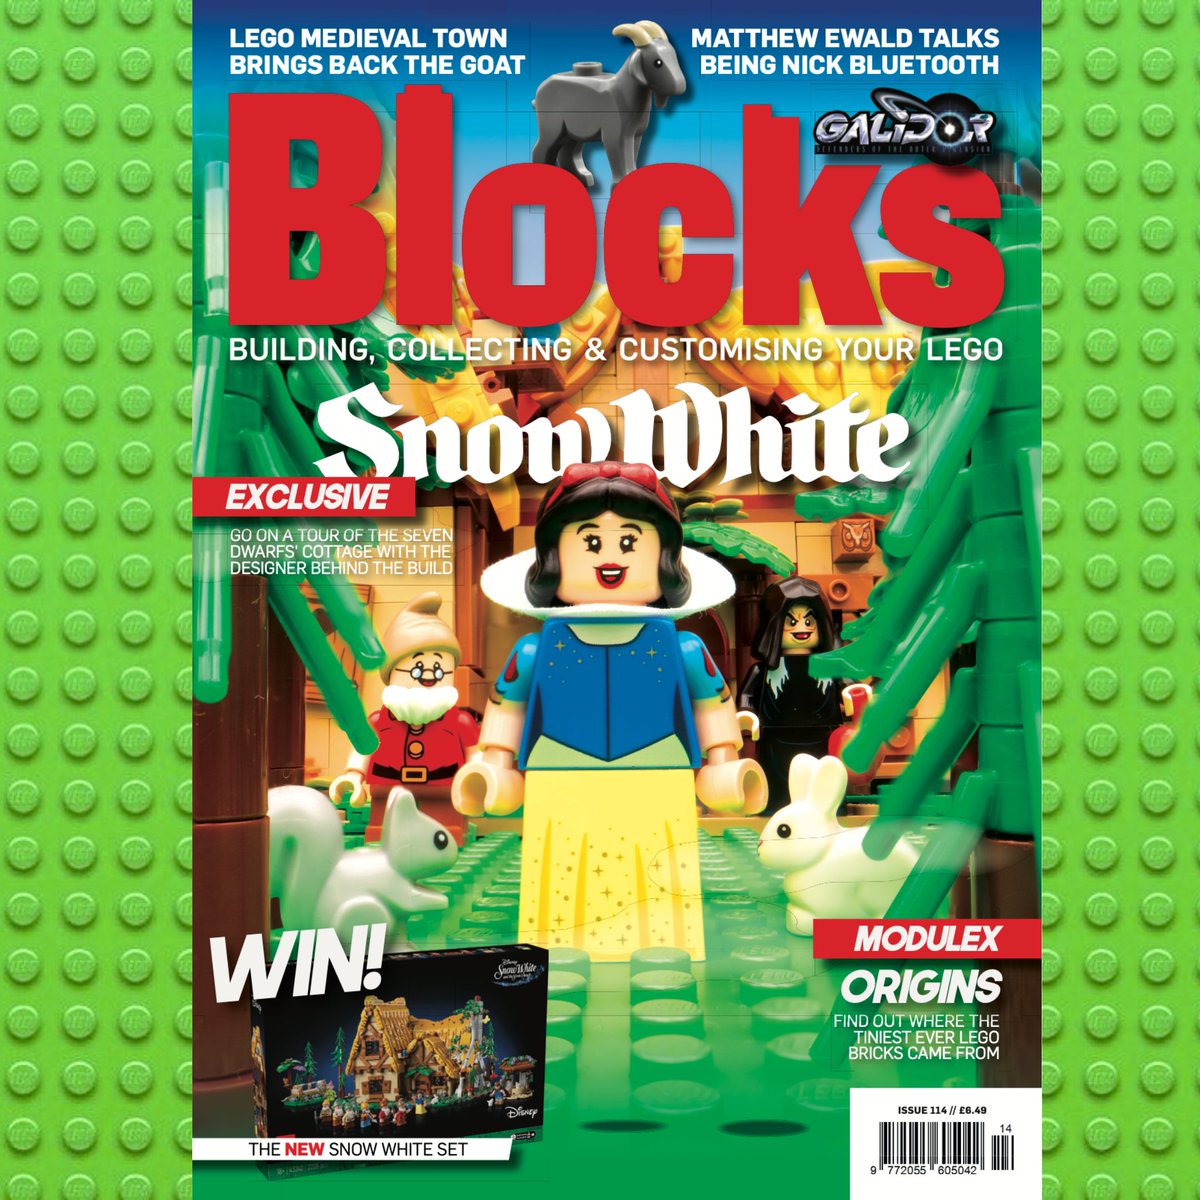 Blocks Issue 114 is available now at BlocksMag.com or as part of your subscription! With it comes exclusive interviews, honest reviews, and amazing content - plus, join us as we discover the 'moulding machine magic' that goes on within #LEGO factories on page 48! #AFOL